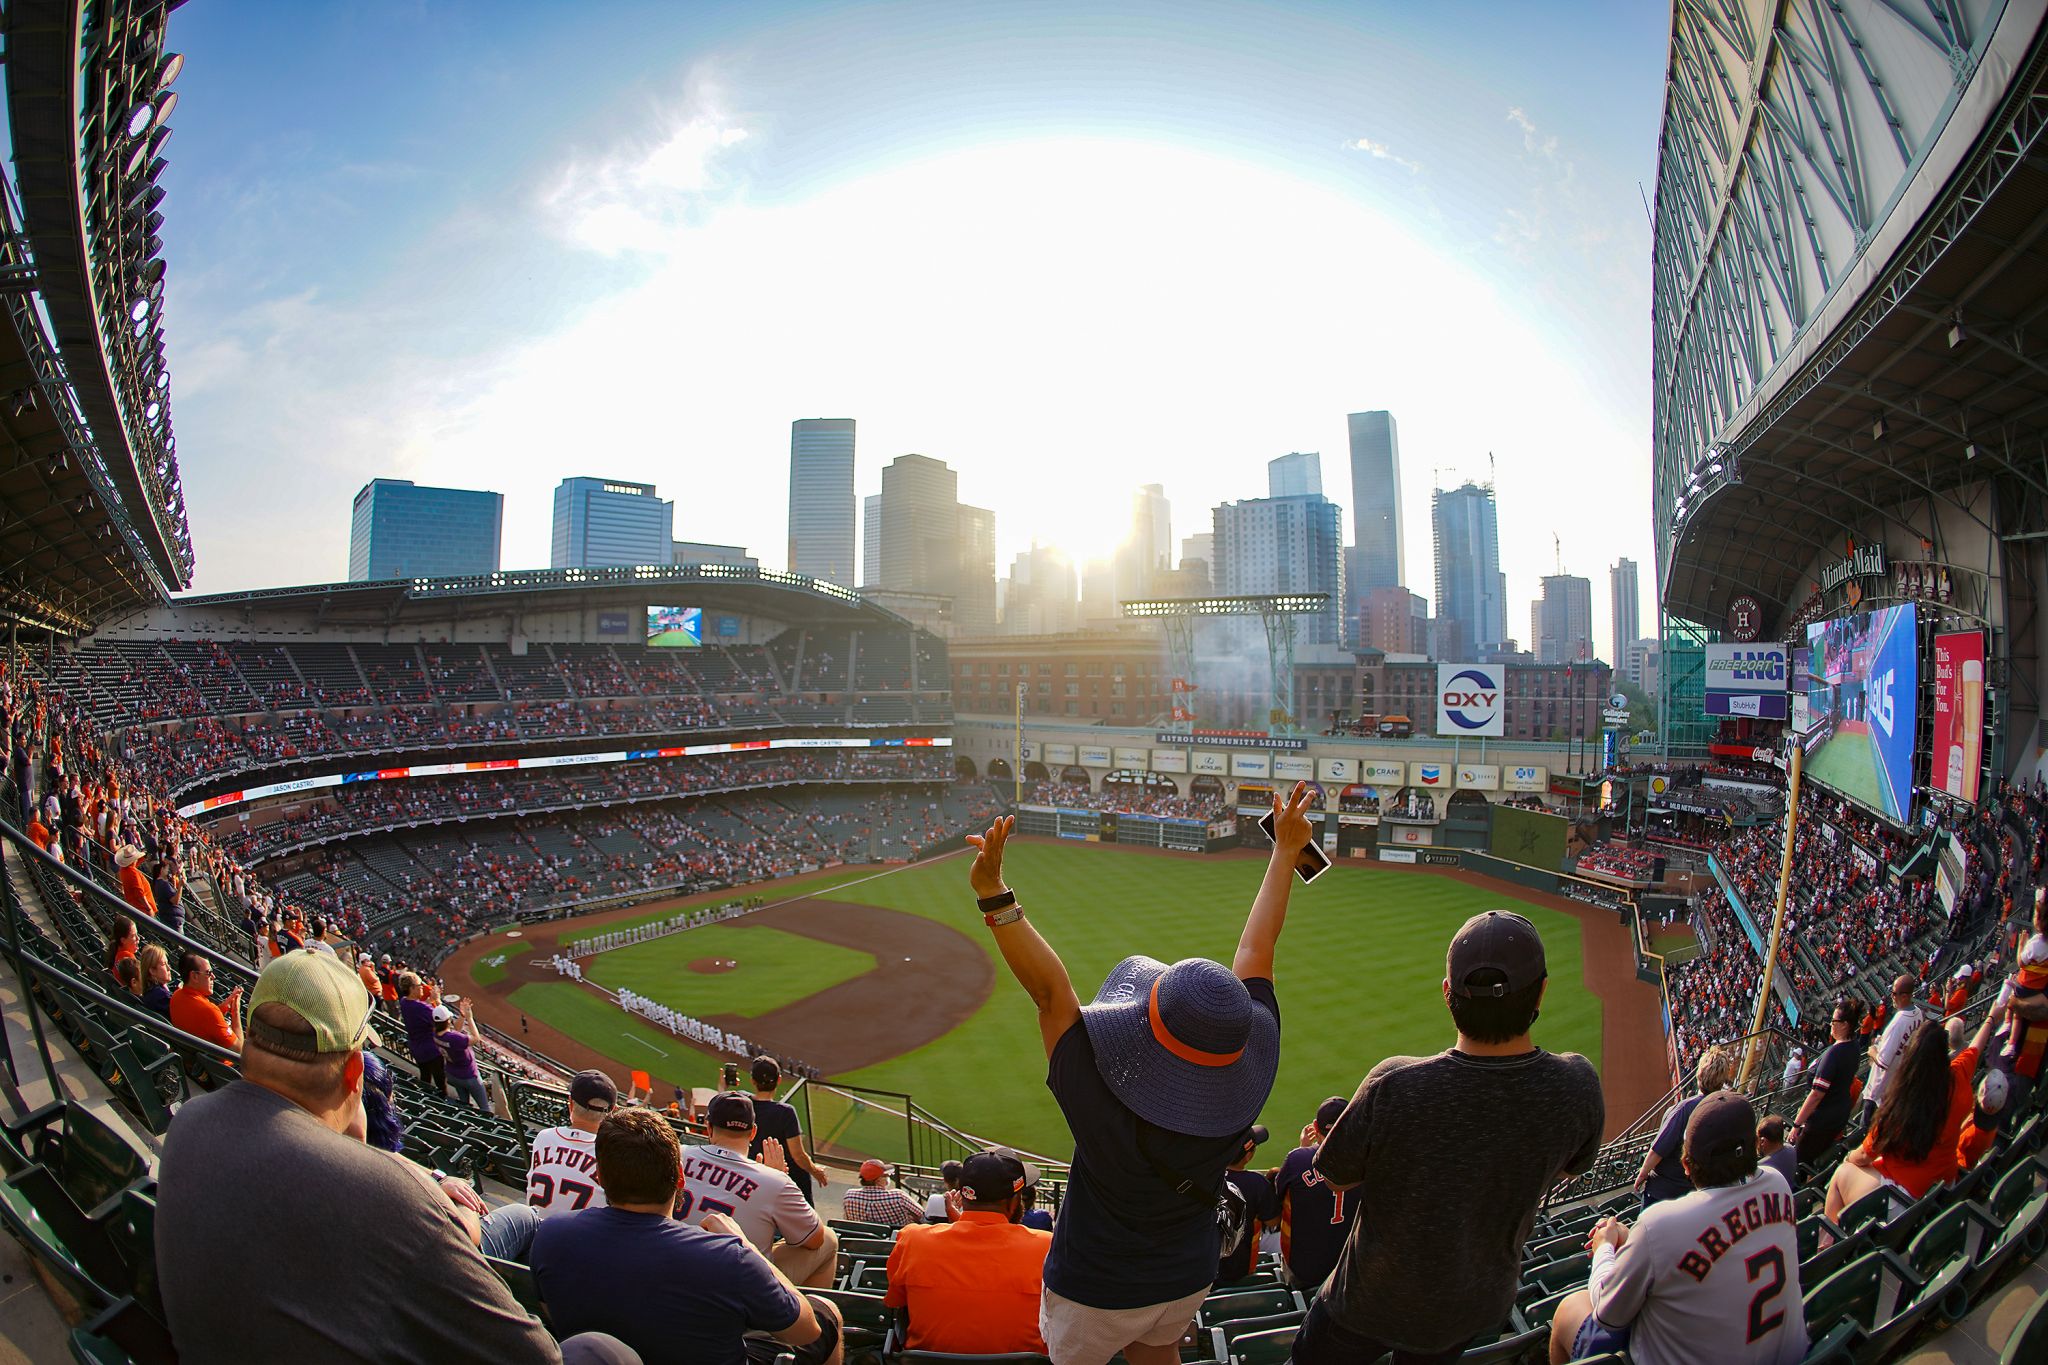 Astros to Spend $25 Million on Minute Maid Park Enhancements